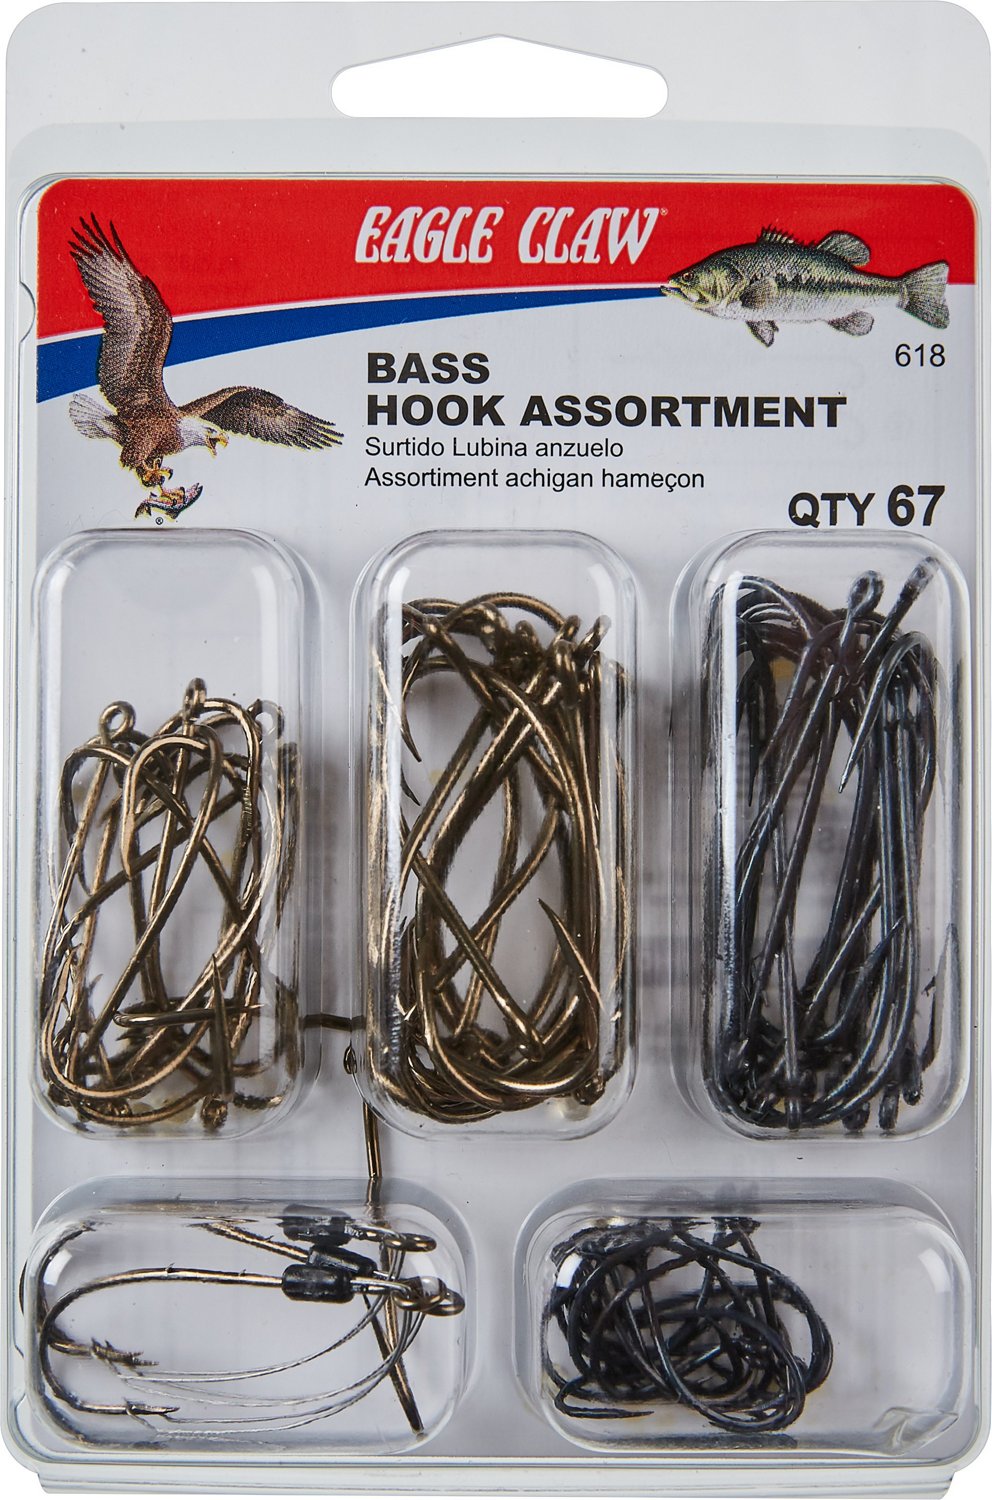 Academy Sports + Outdoors Eagle Claw Bass Hook Assortment 67-Pack